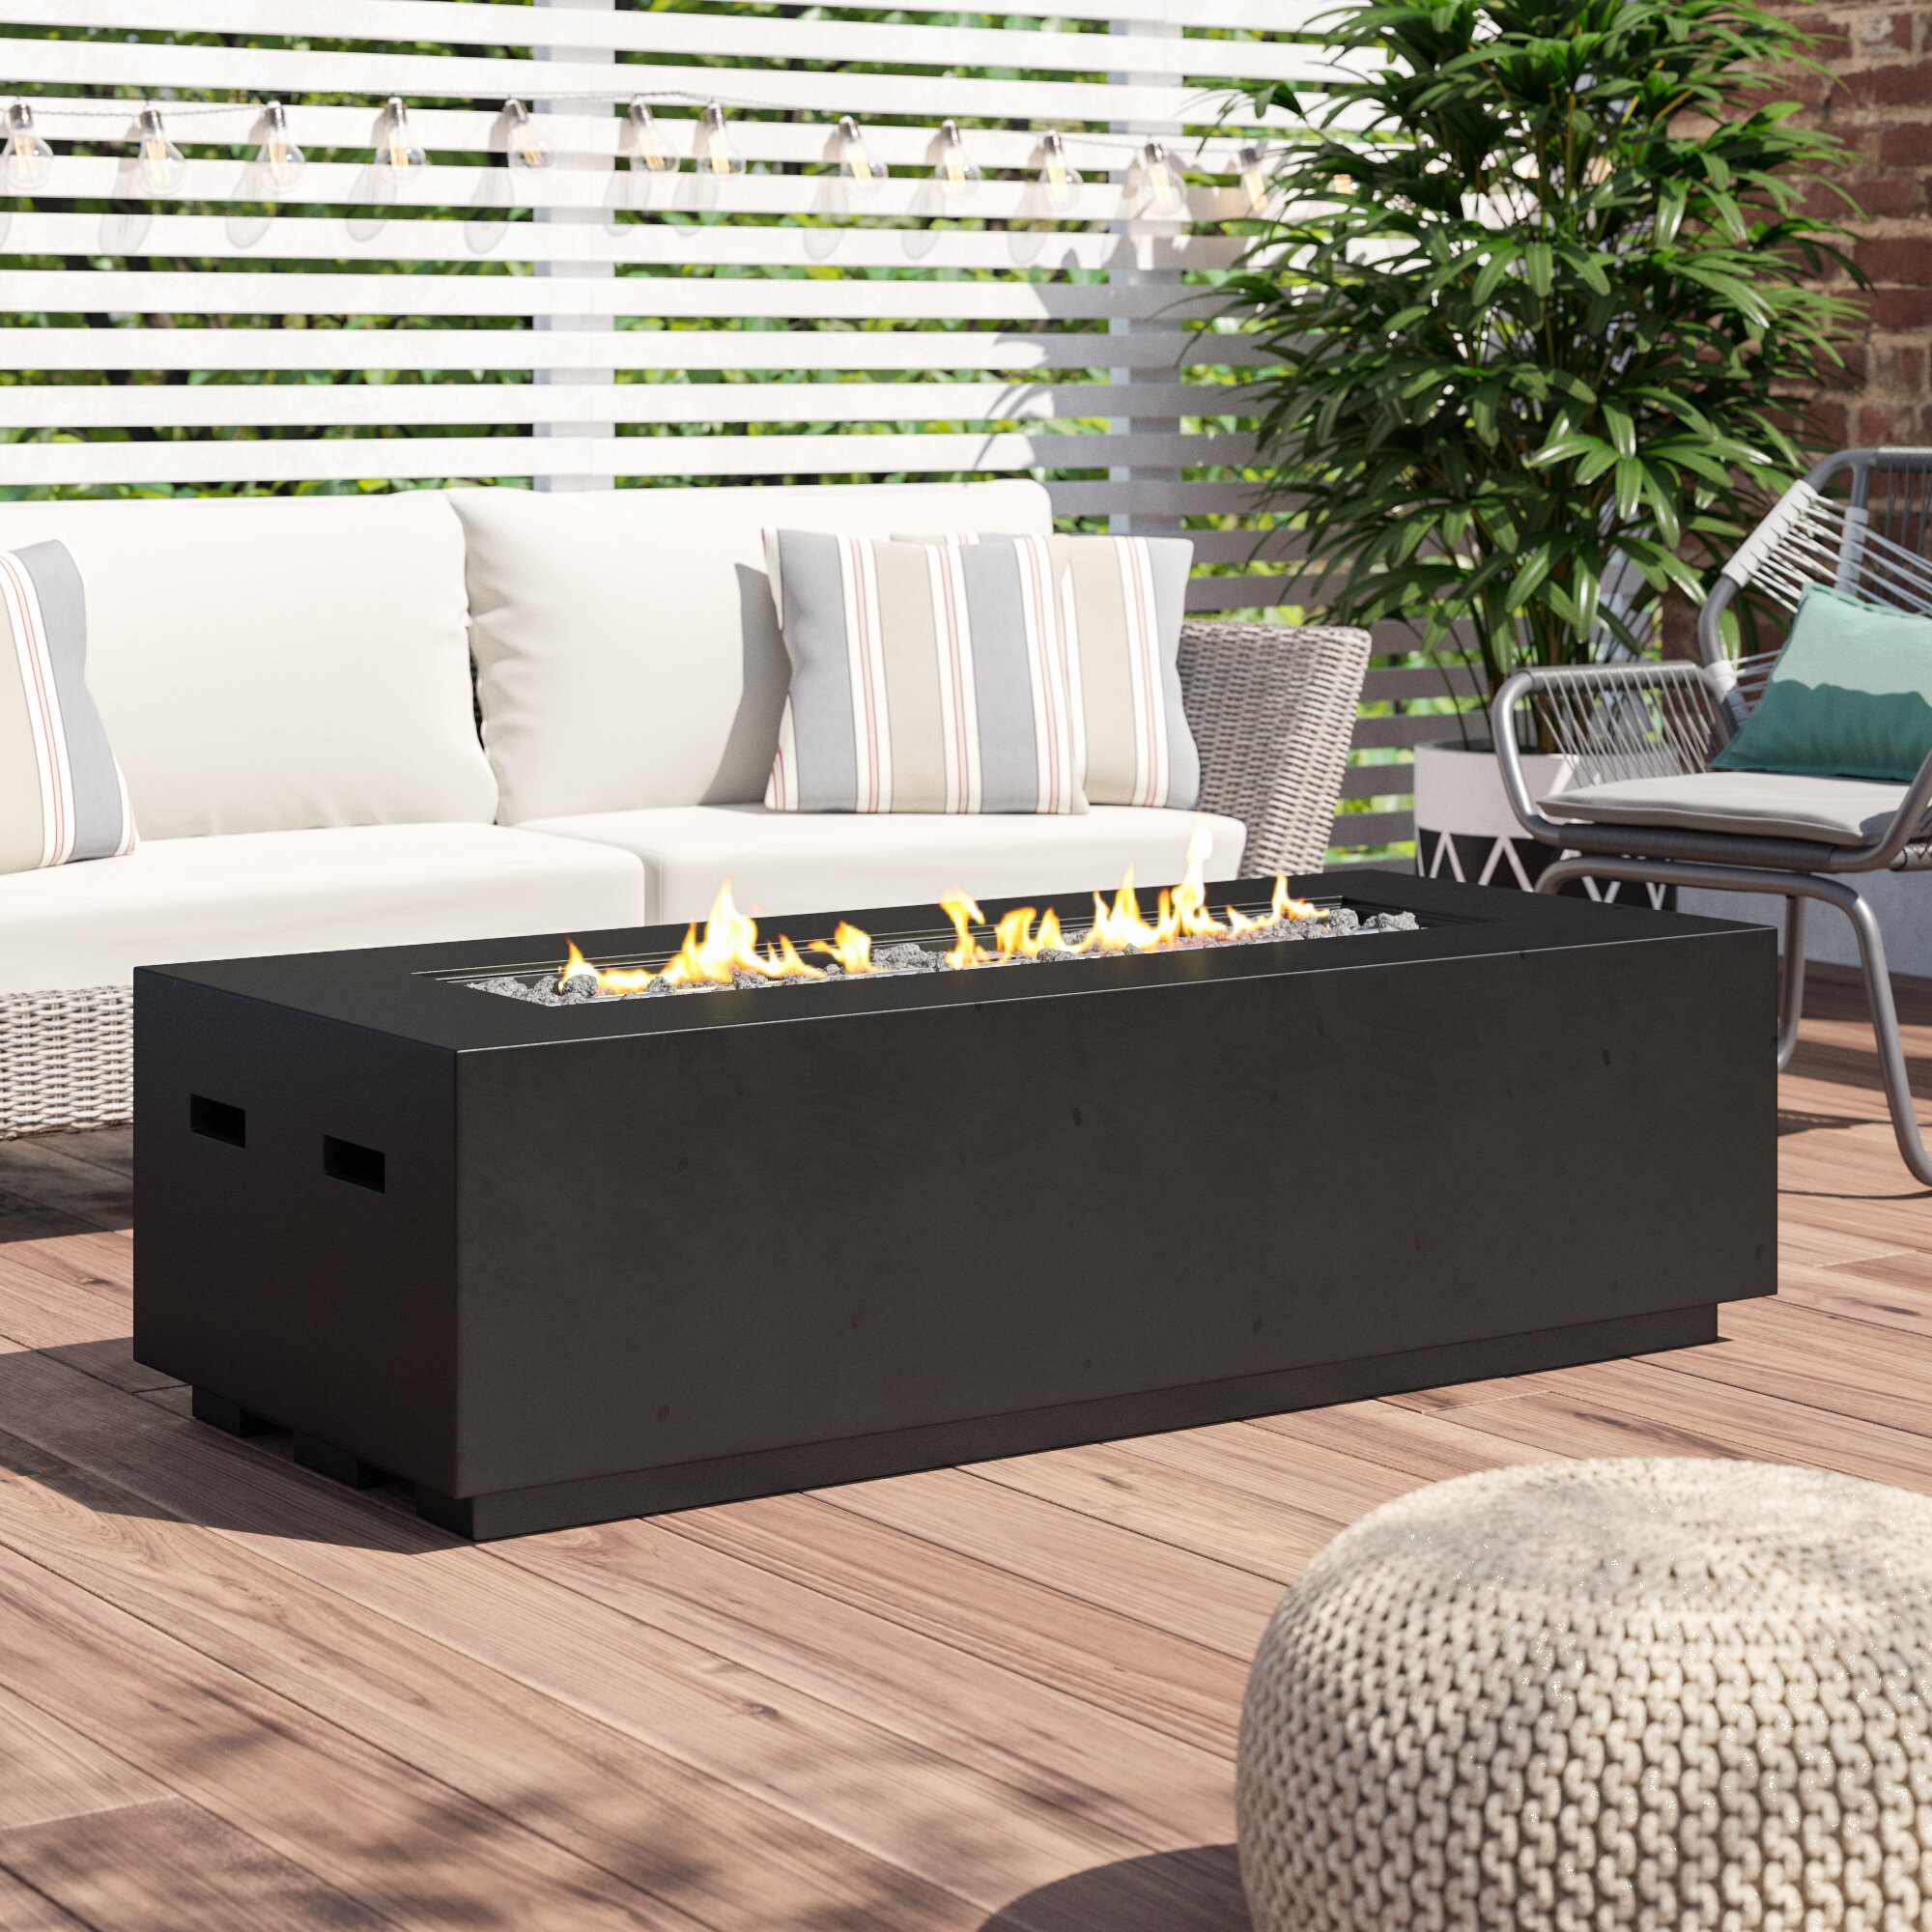 Propane Fire Pit Coffee Table
 Coffee Table Fire Pit Propane